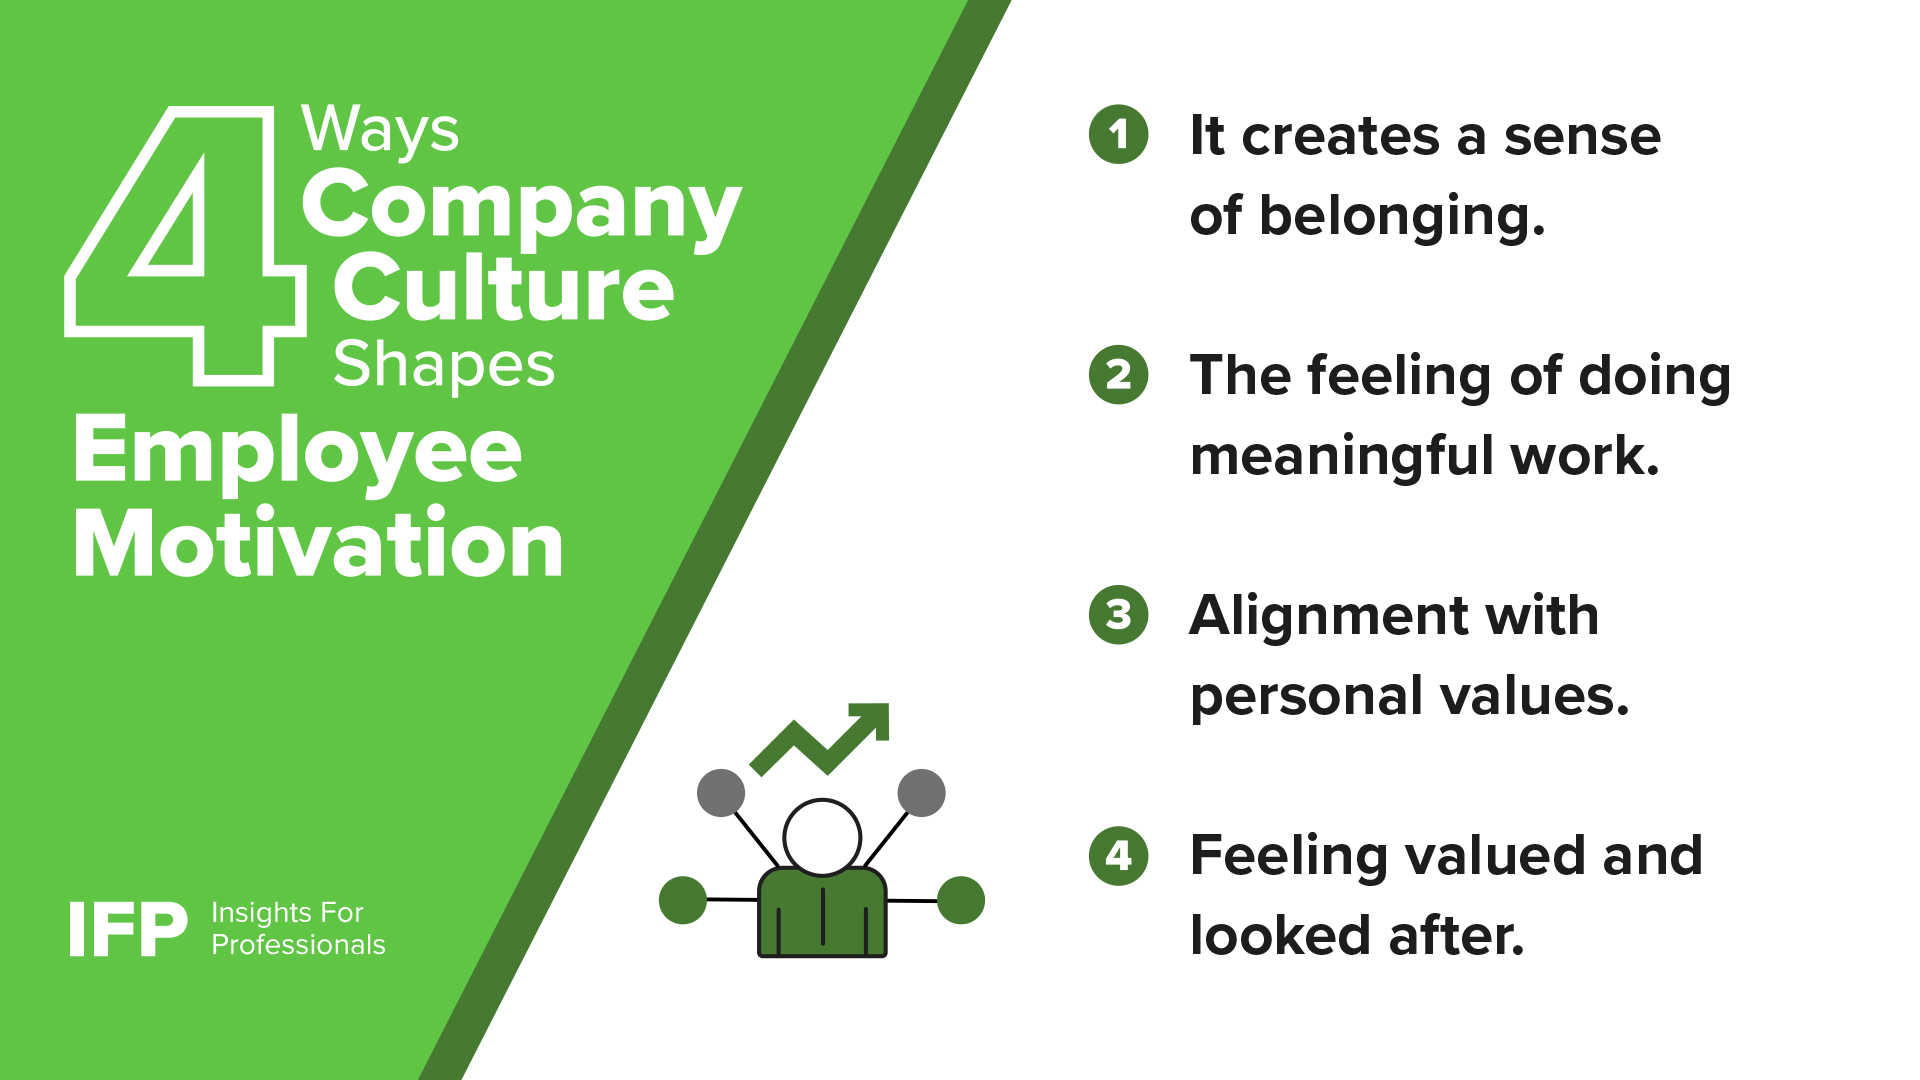 IFP visual on how HR managers and businesses can shape employee motivation with company culture